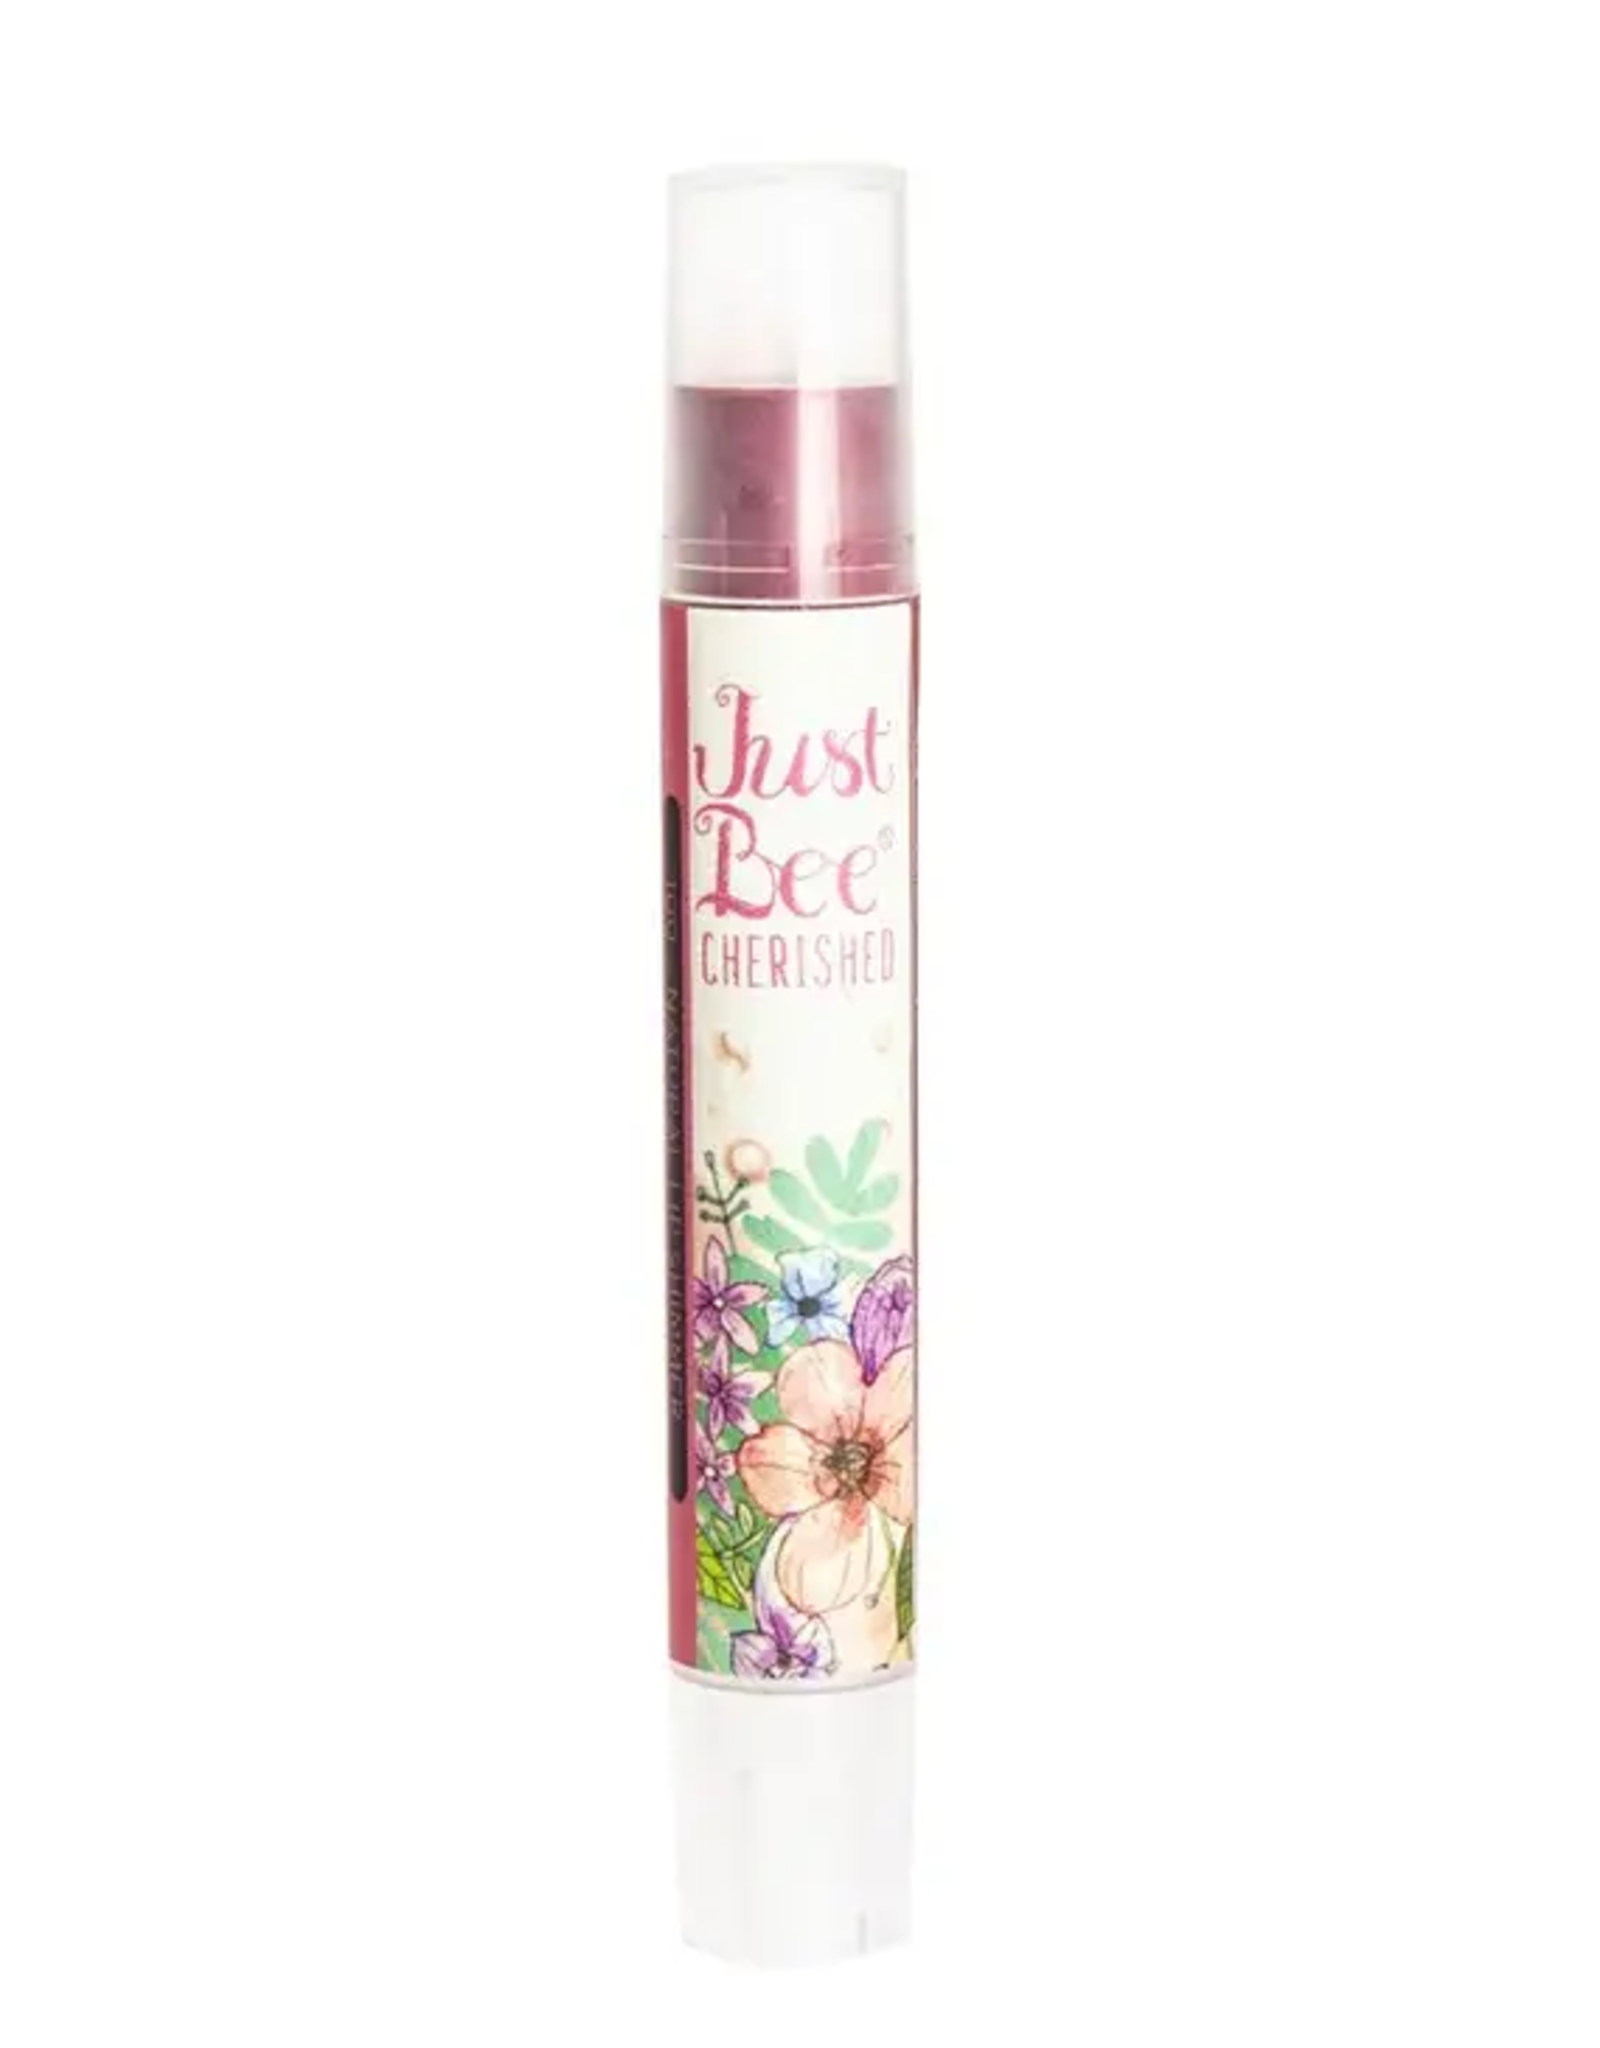 Just Bee Cosmetics Lip Shimmer - Cherished